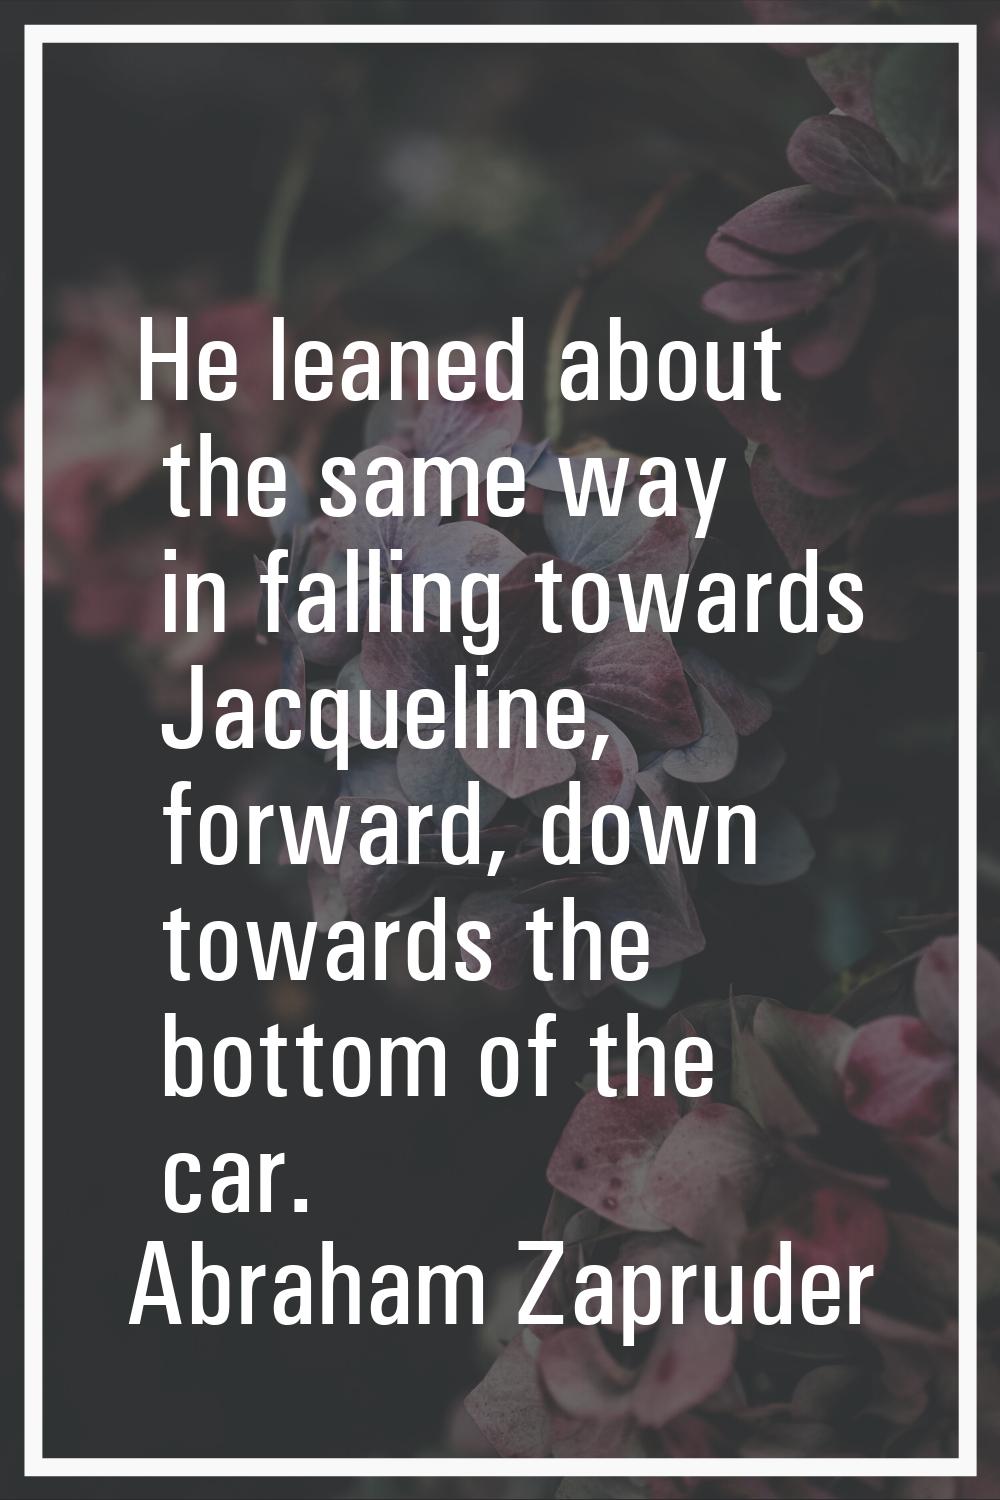 He leaned about the same way in falling towards Jacqueline, forward, down towards the bottom of the